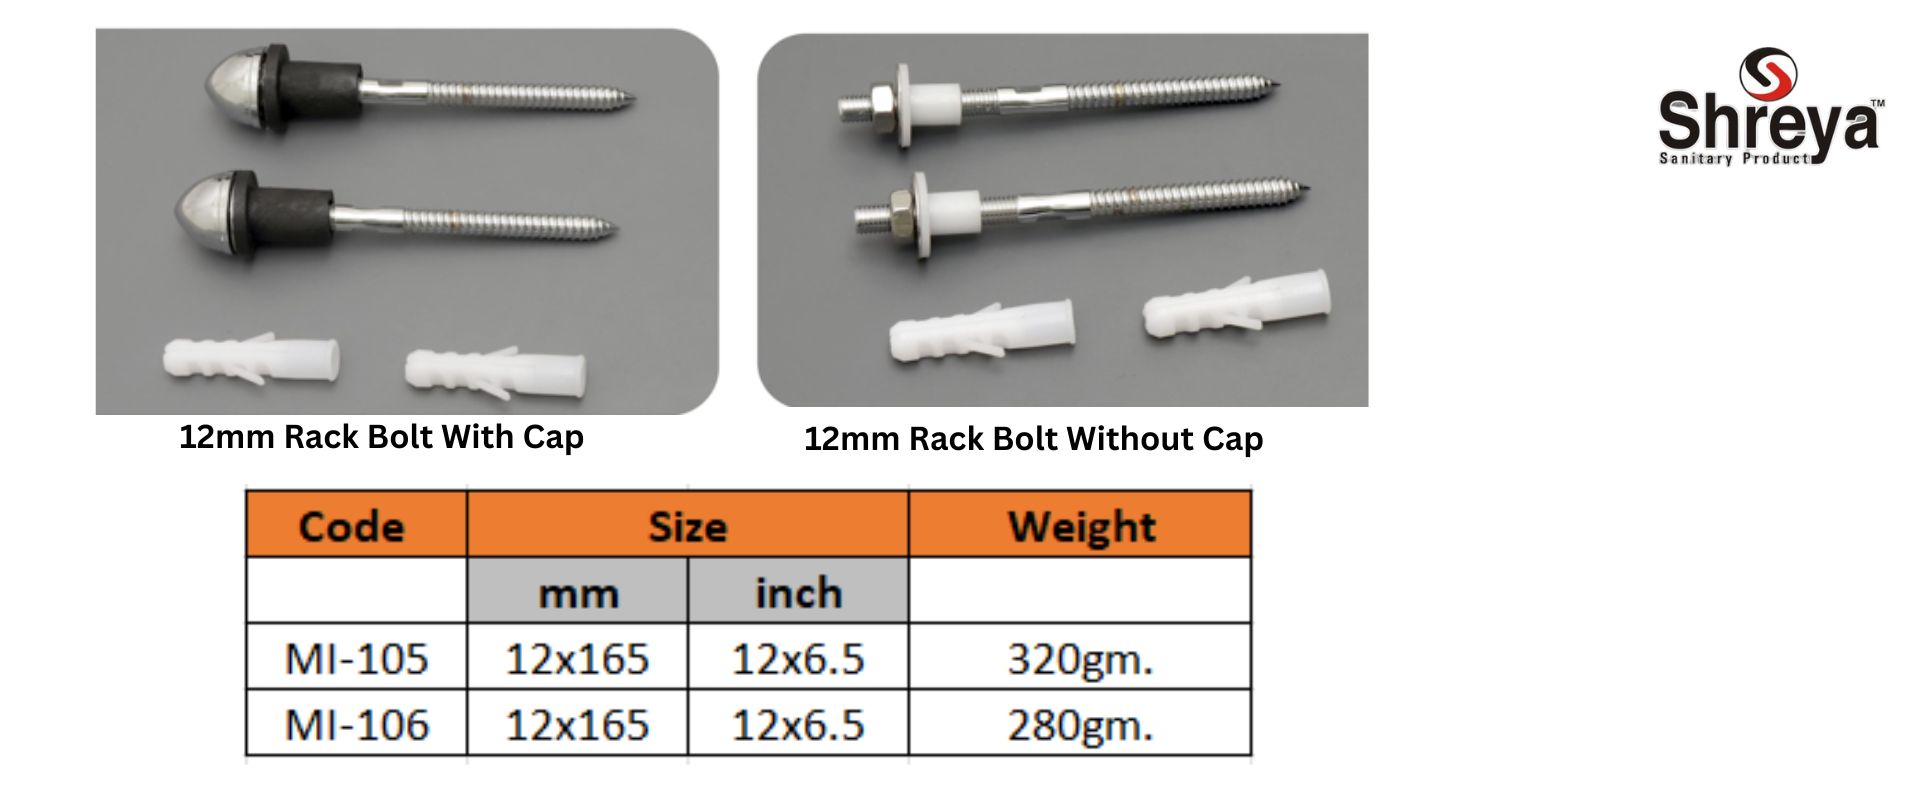 12mm Rack Bolt With Cap